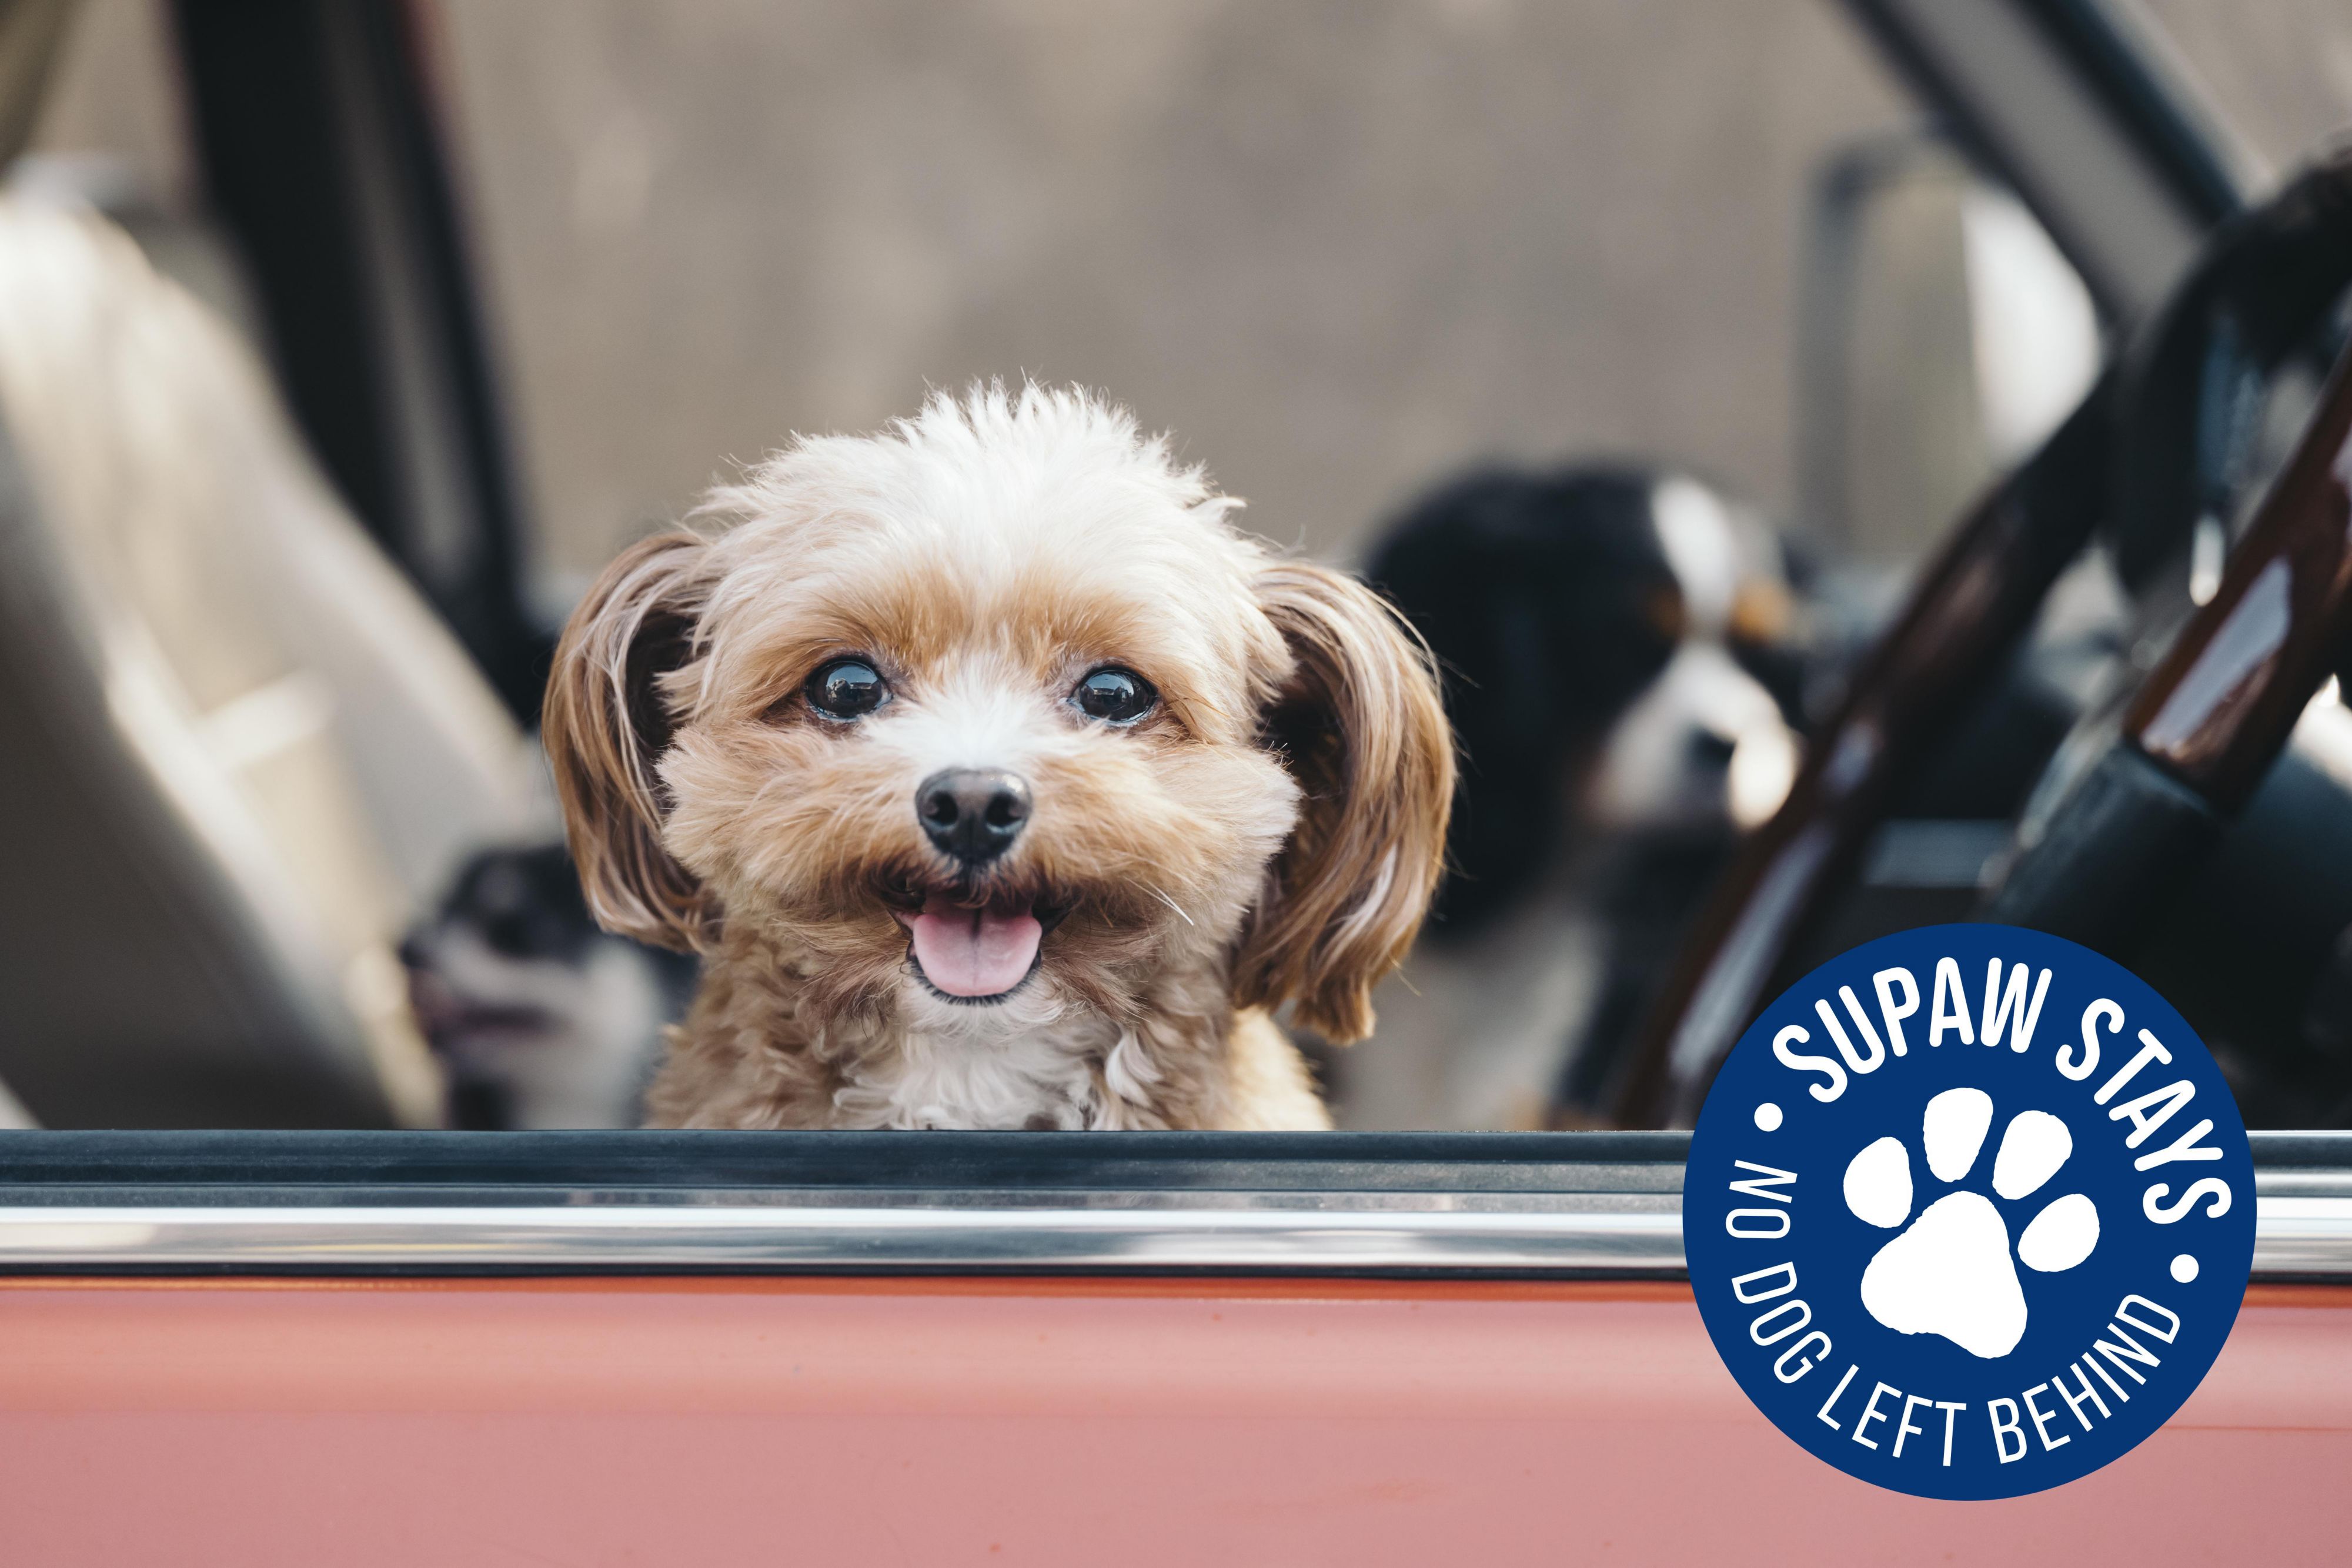 Bring your four-legged friend for a SuPaw Stay to our dog-friendly hotel in Edinburgh. For just an additional £15 per night which includes a pouch of SeaSnax treats. 

We’ve partnered up with Winston’s Doggy Day Care in Portobello so you can enjoy exploring whilst your dog plays. Bookings to be made direct via them. 

Discover more below.
